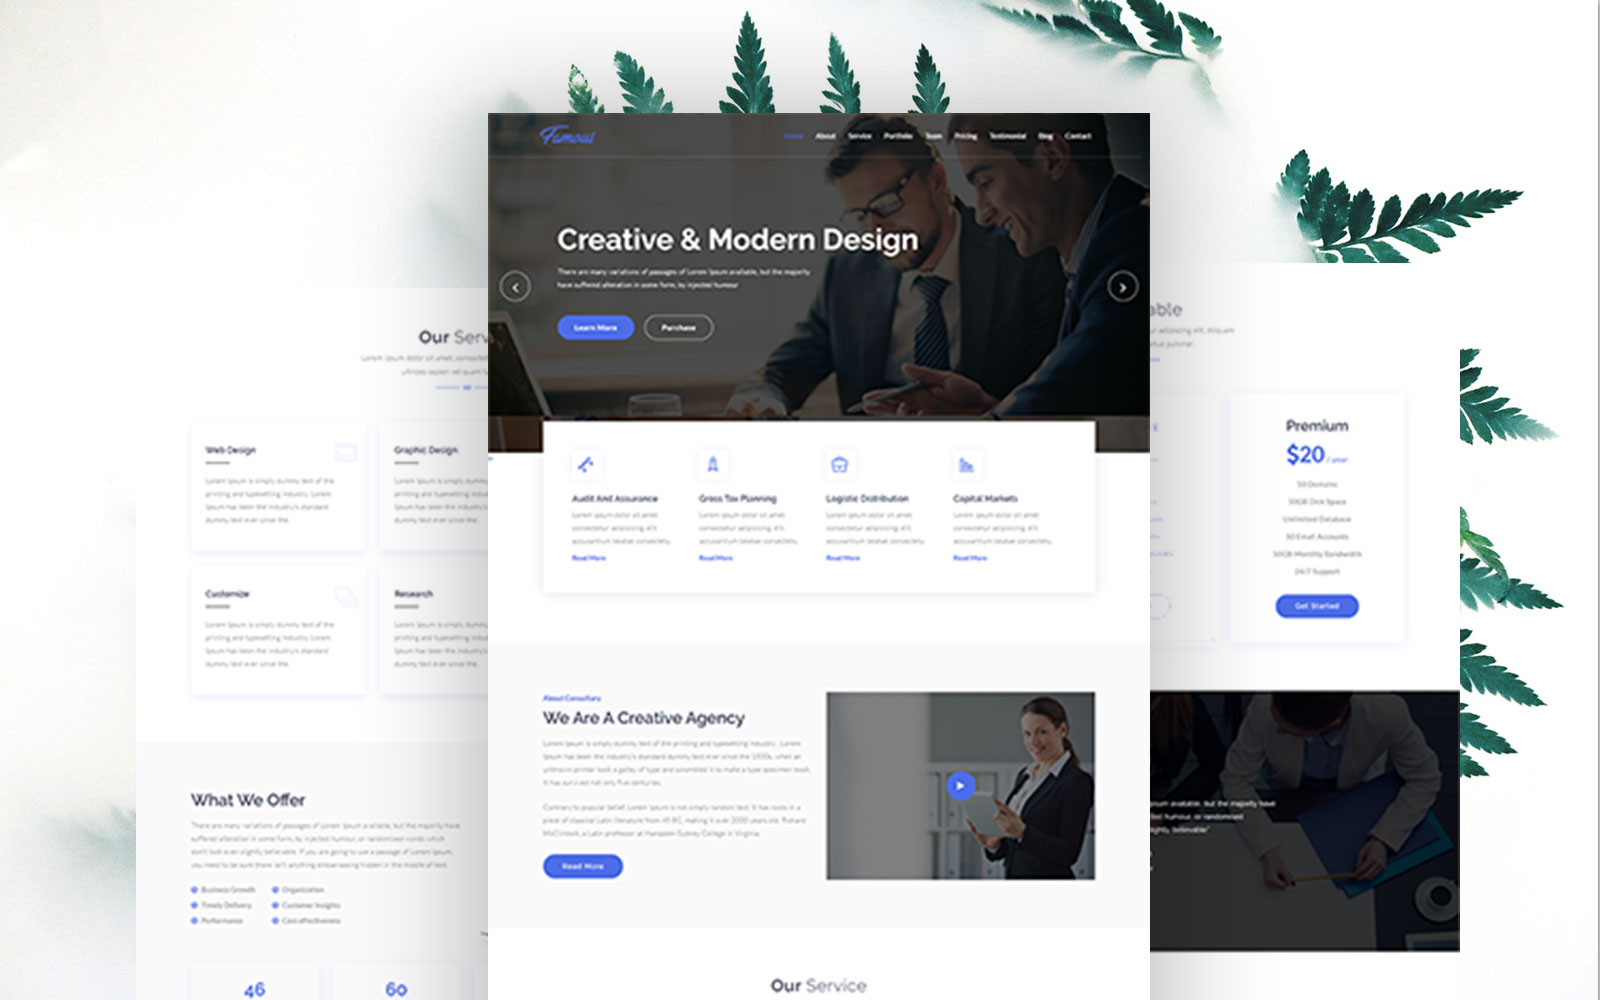 Famous - Digital Corporate Business HTML Landing Page Template